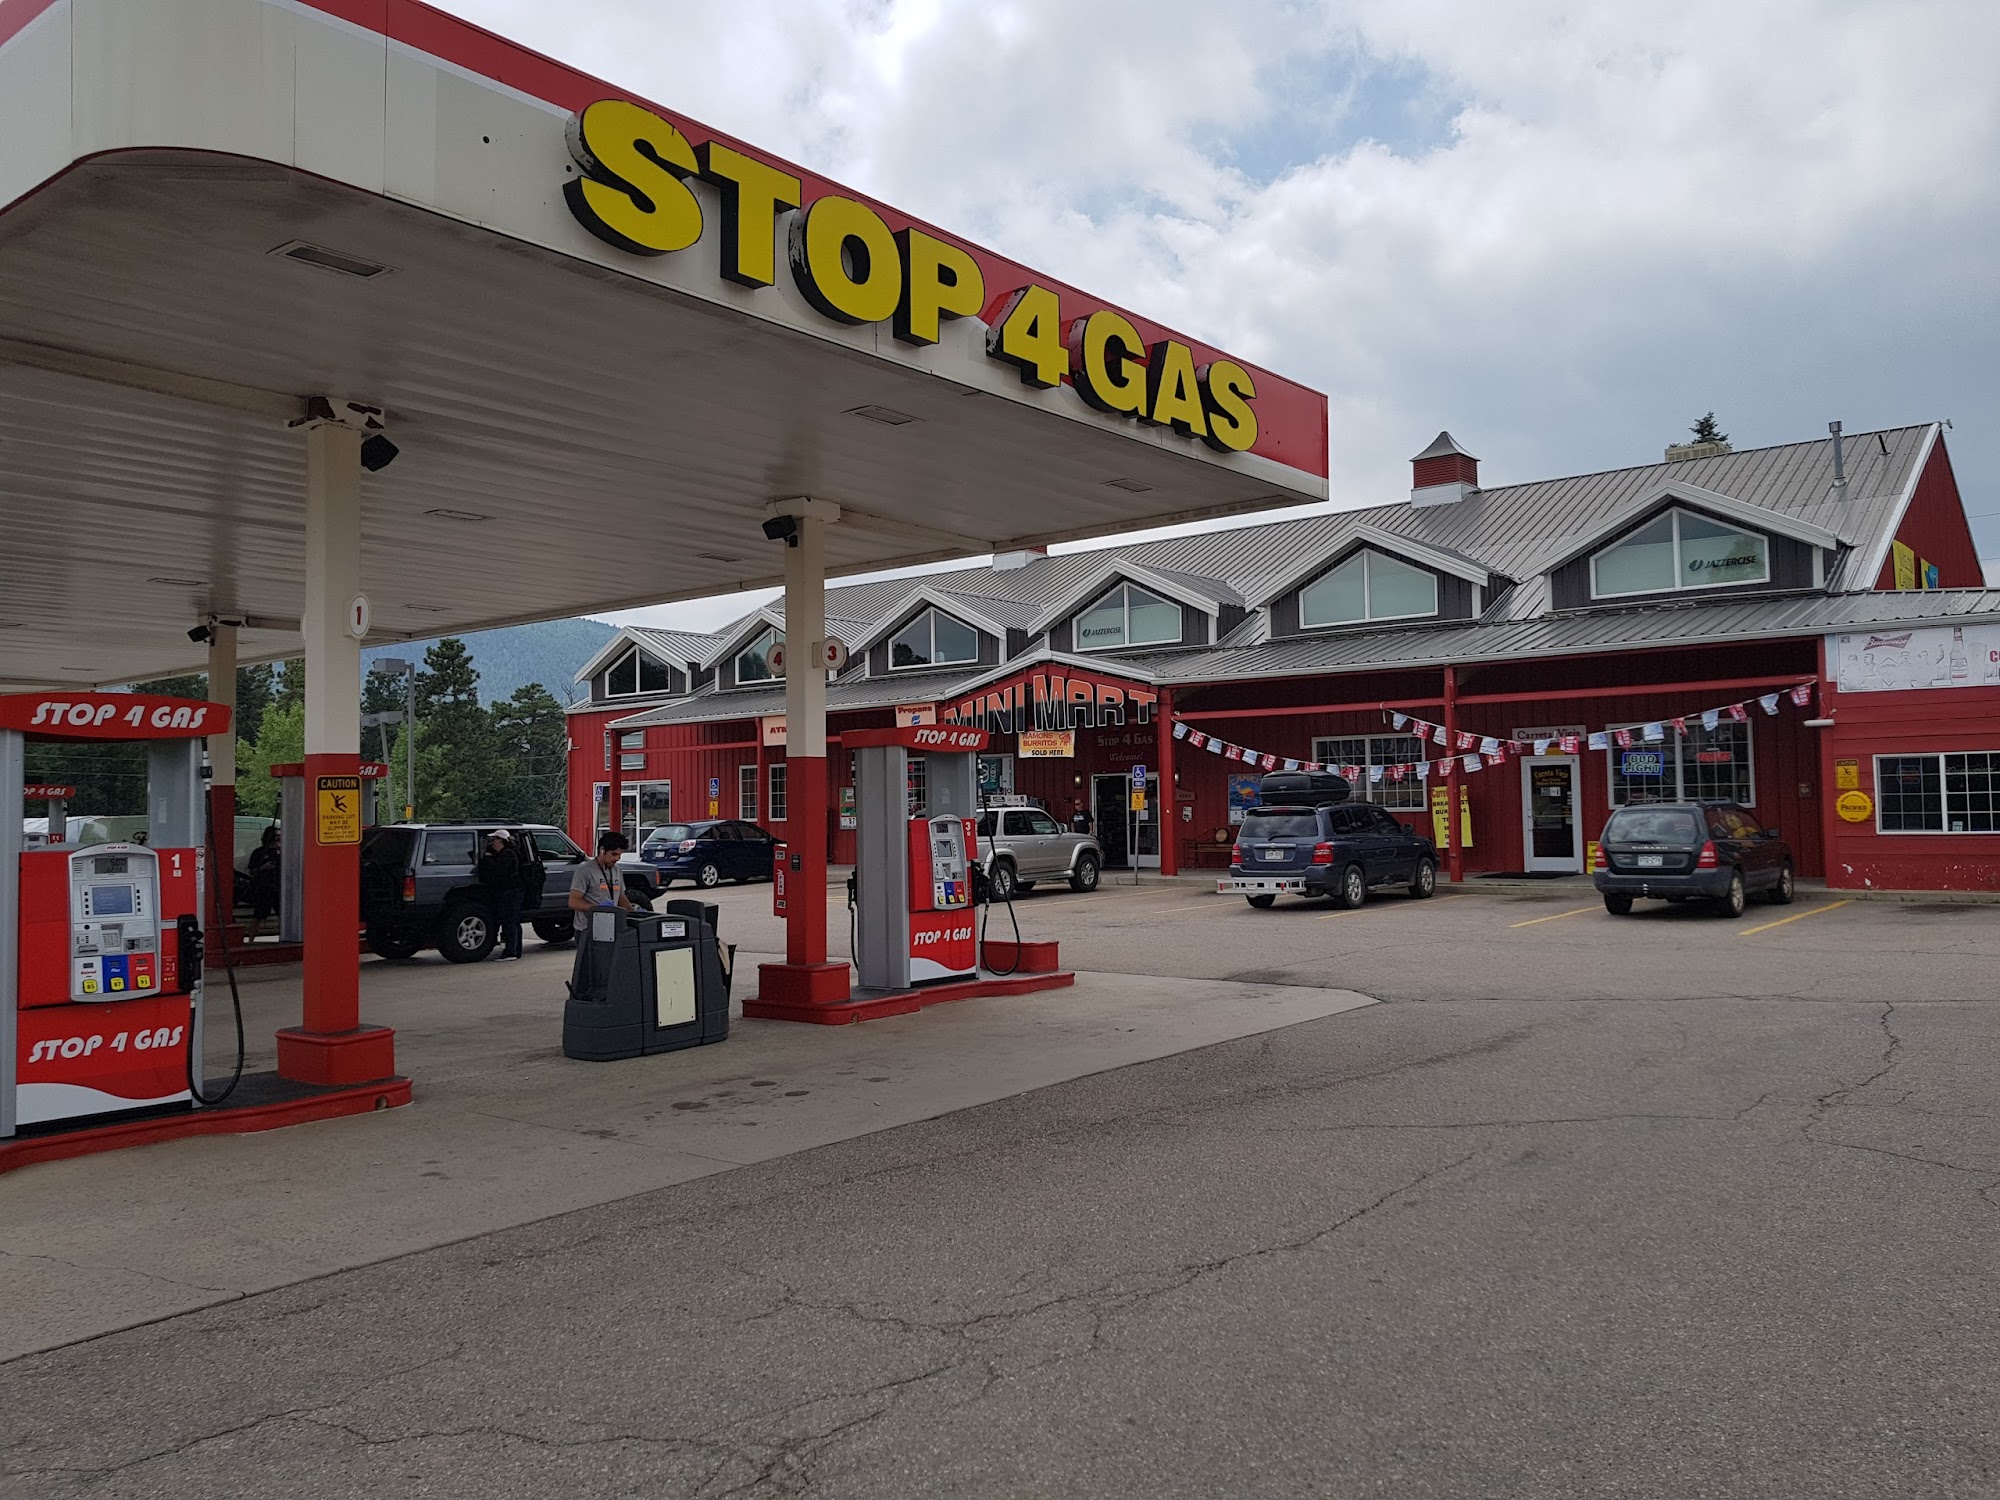 STOP 4 GAS